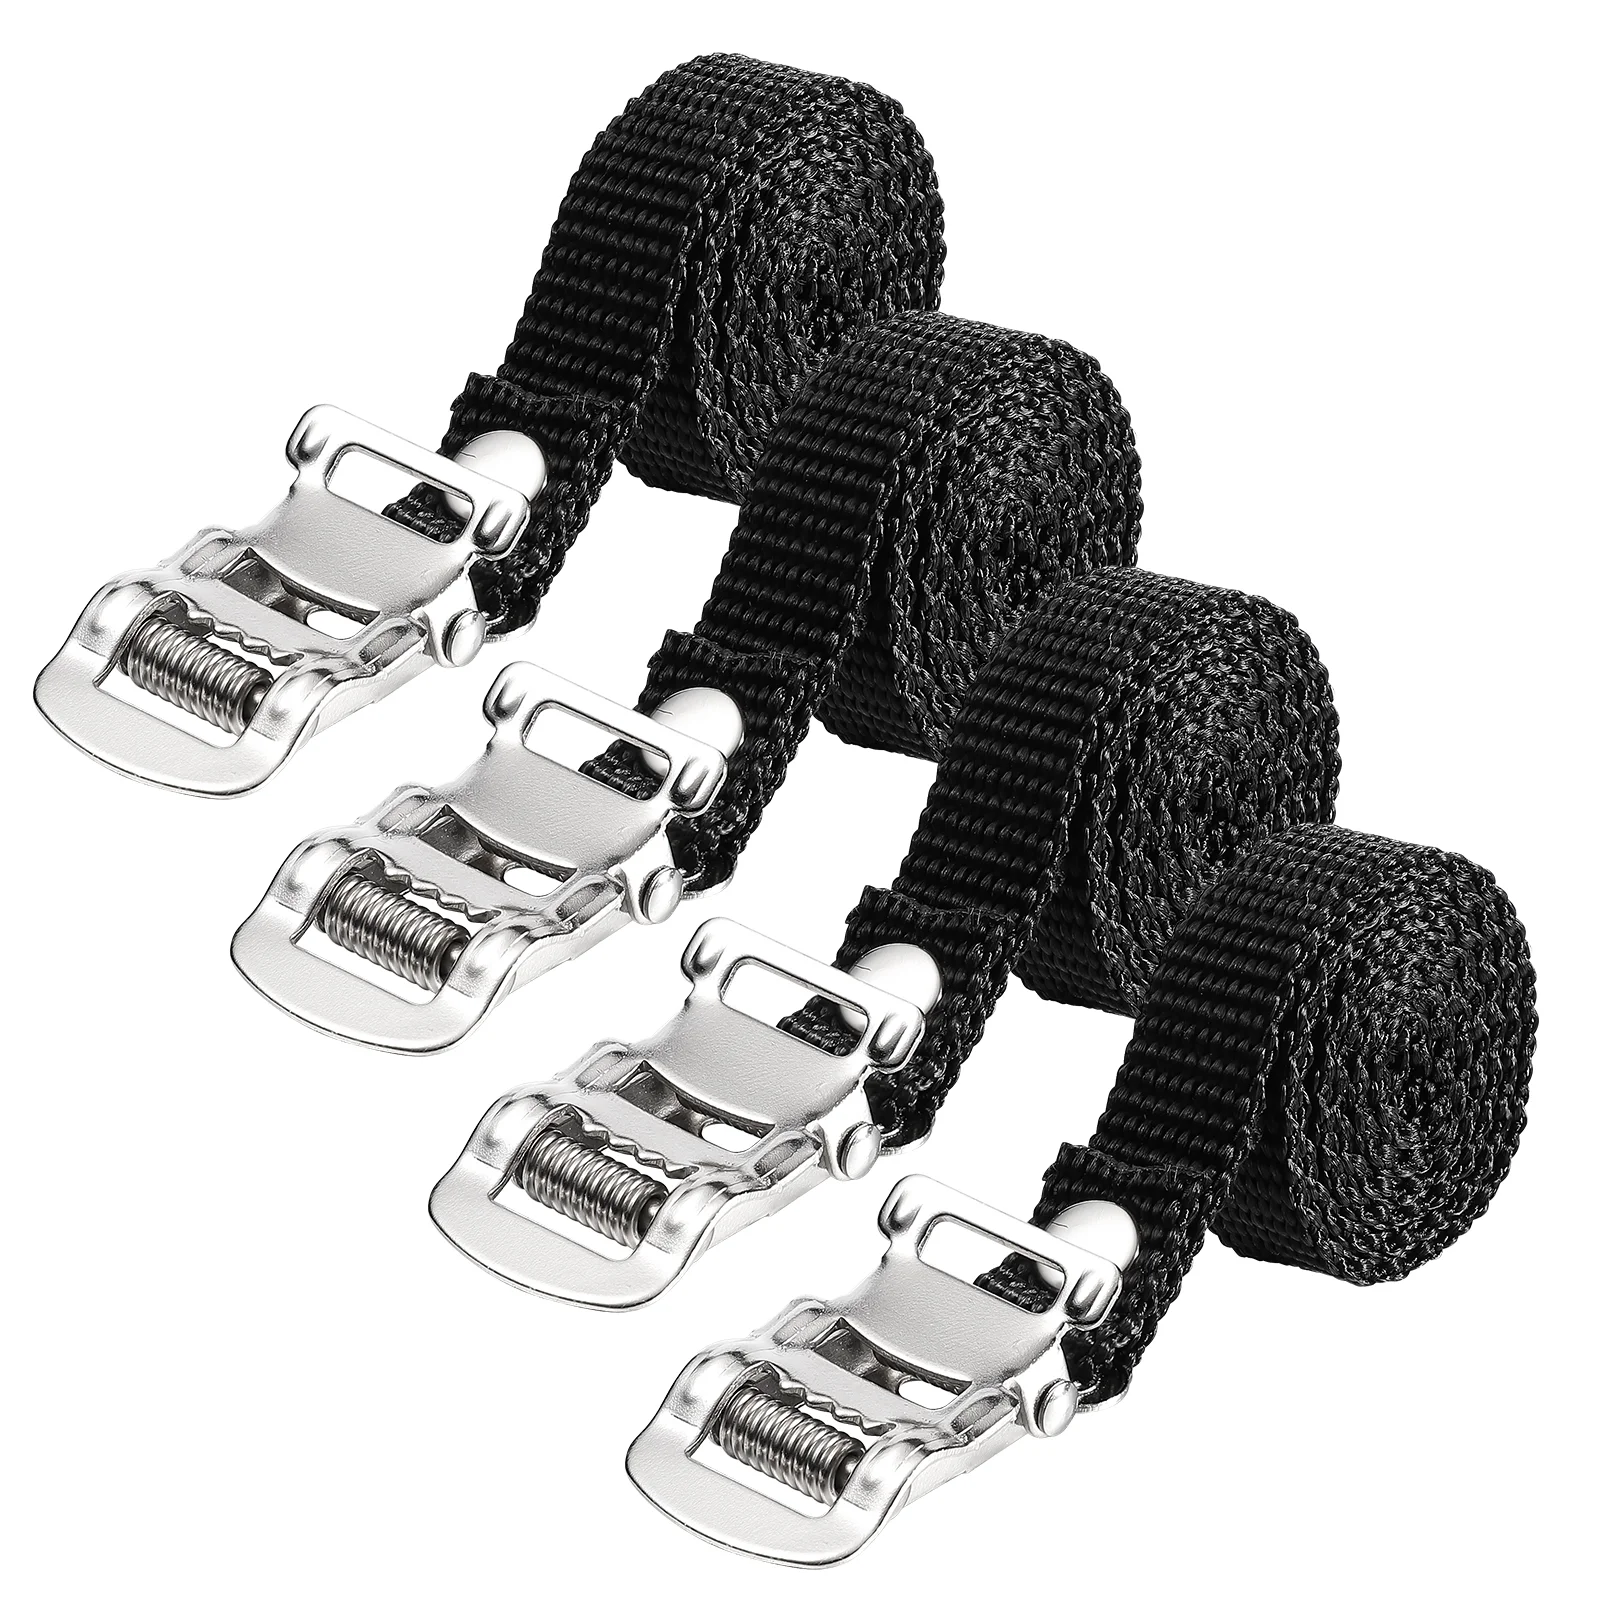 

Garneck 4 Pcs Bikes Pedal Toe Strap Foot Pedal Straps Replacement for Exercise Stationary Bike